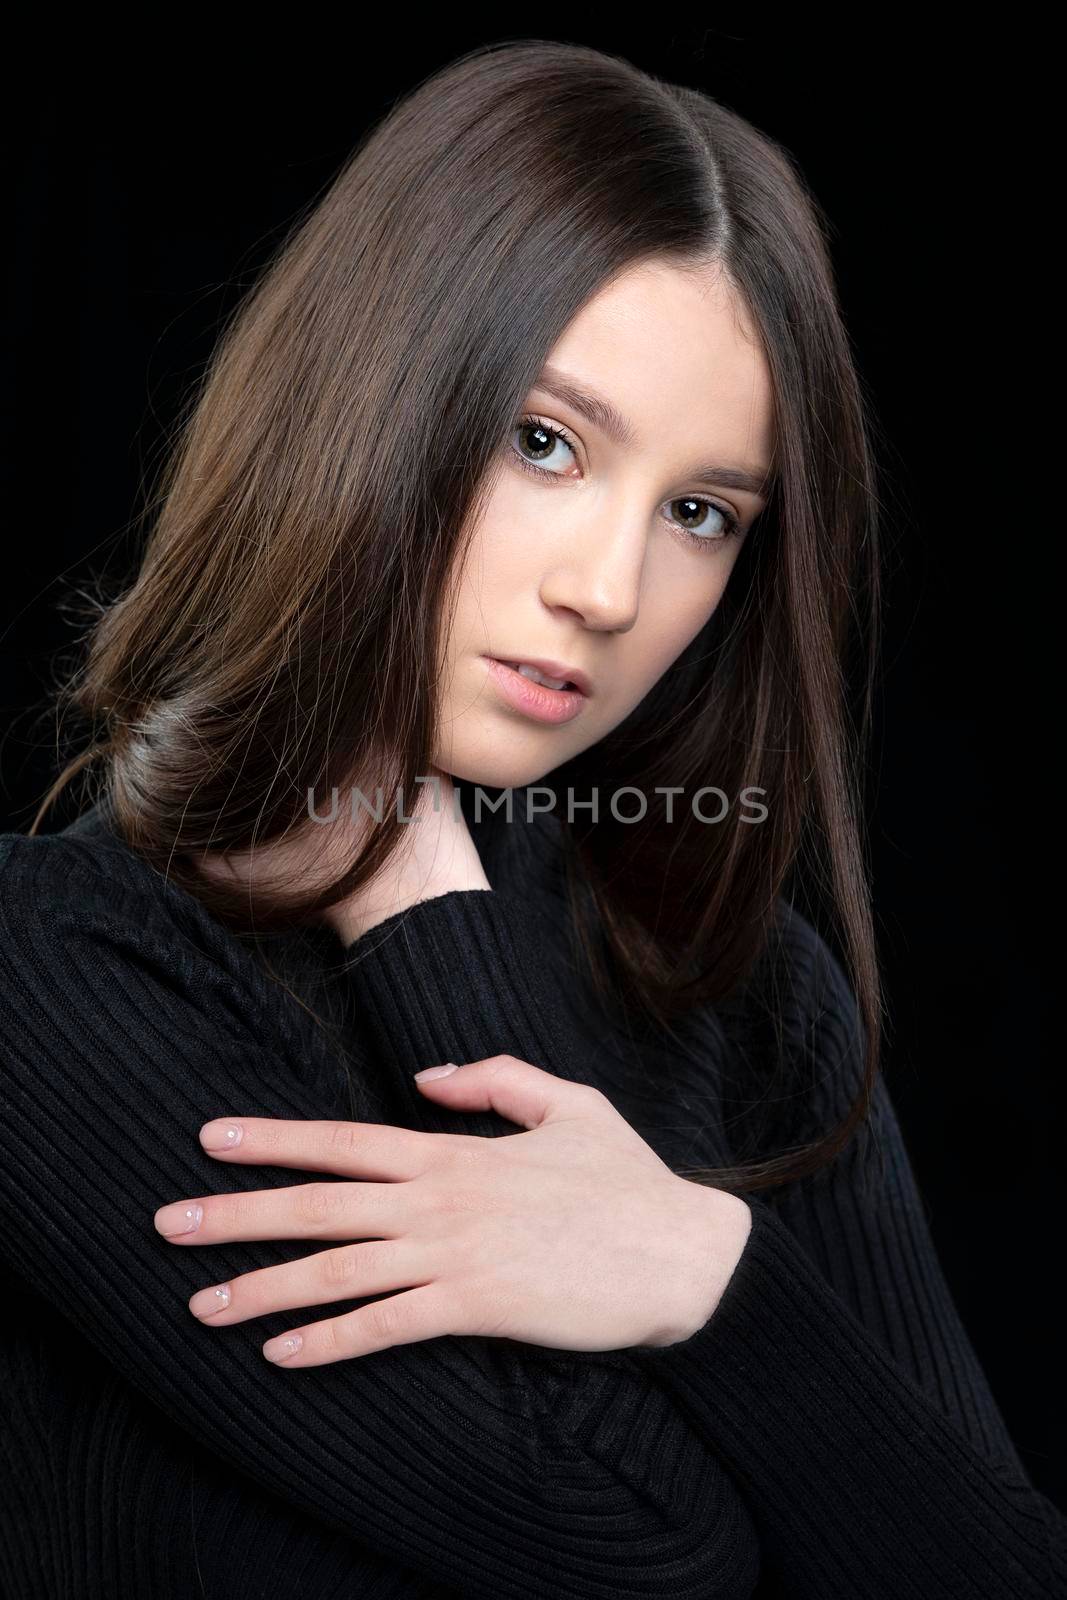 Vertical portrait of a beautiful seventeen year old girl with long hair against a dark background.